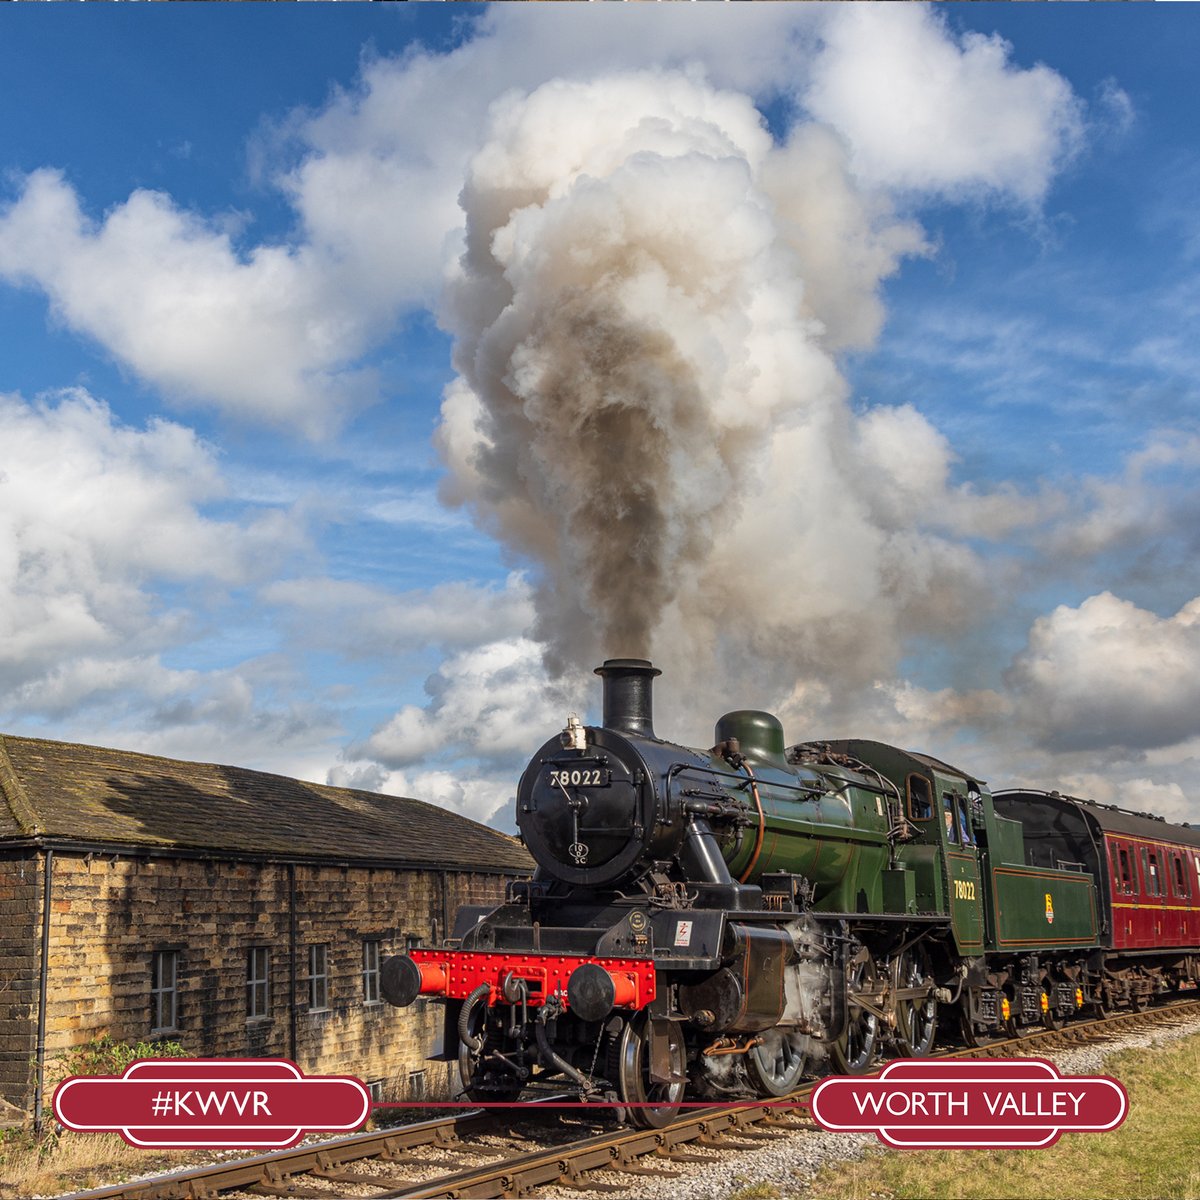 🚂Back in Steam! 🚂

78022 BR Standard 2 will be steaming through the Worth Valley this weekend; we hope to see you across the weekend!

#kwvr // kwvr.co.uk